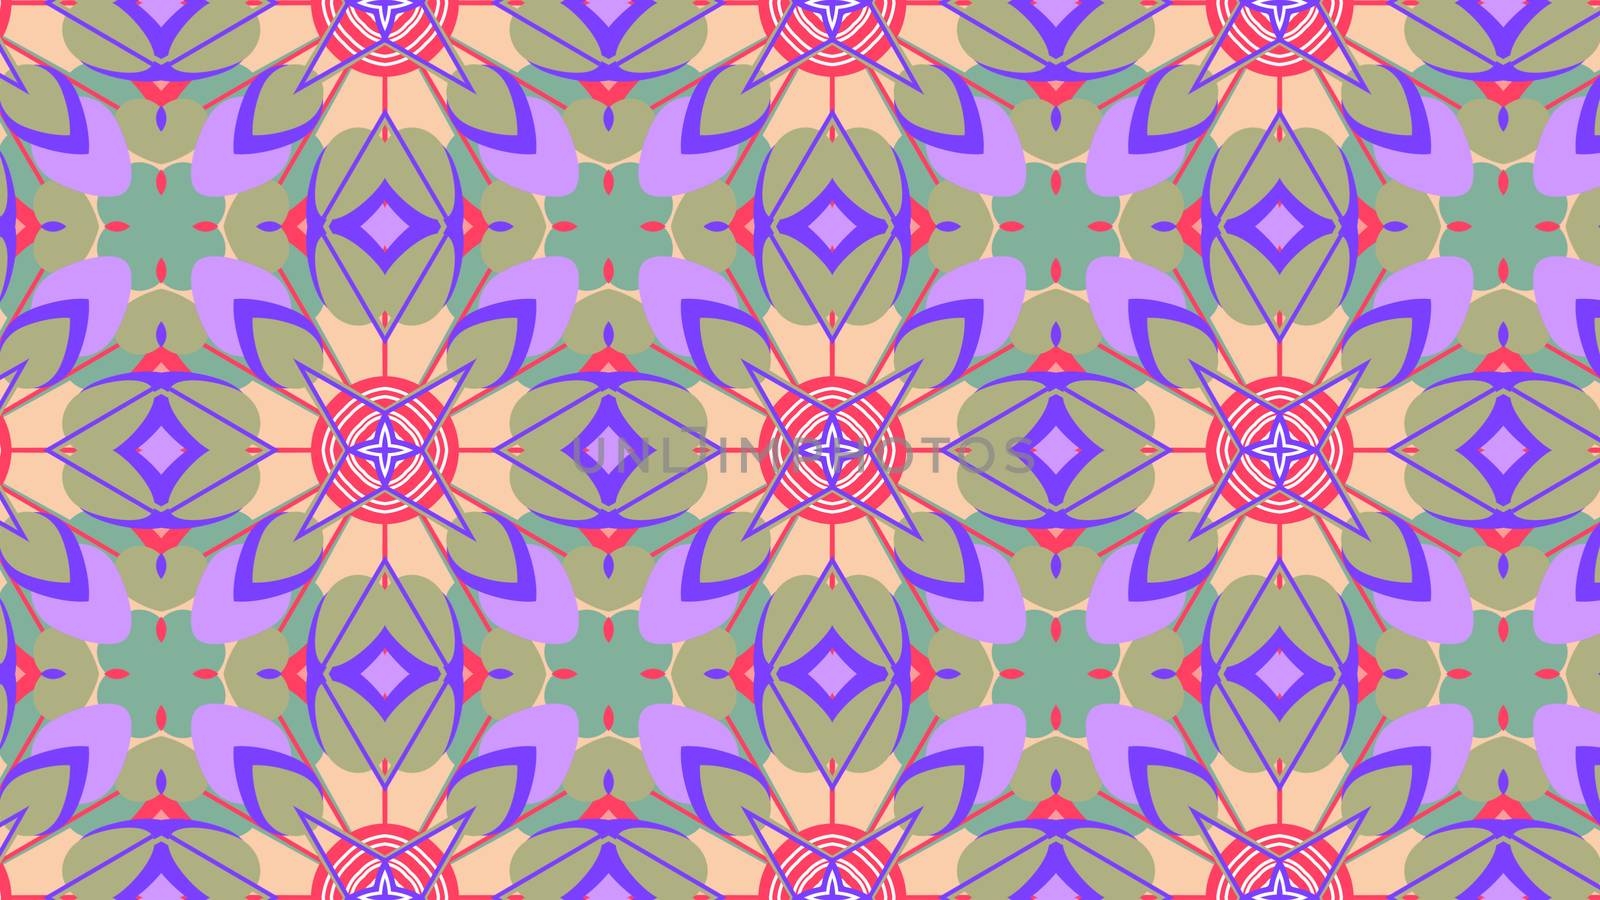 Marvelous 3d illustration of red and grey tulips making kaleidoscope round and diamond patterns in the pink backdrop. They look kiddy and optimistic.